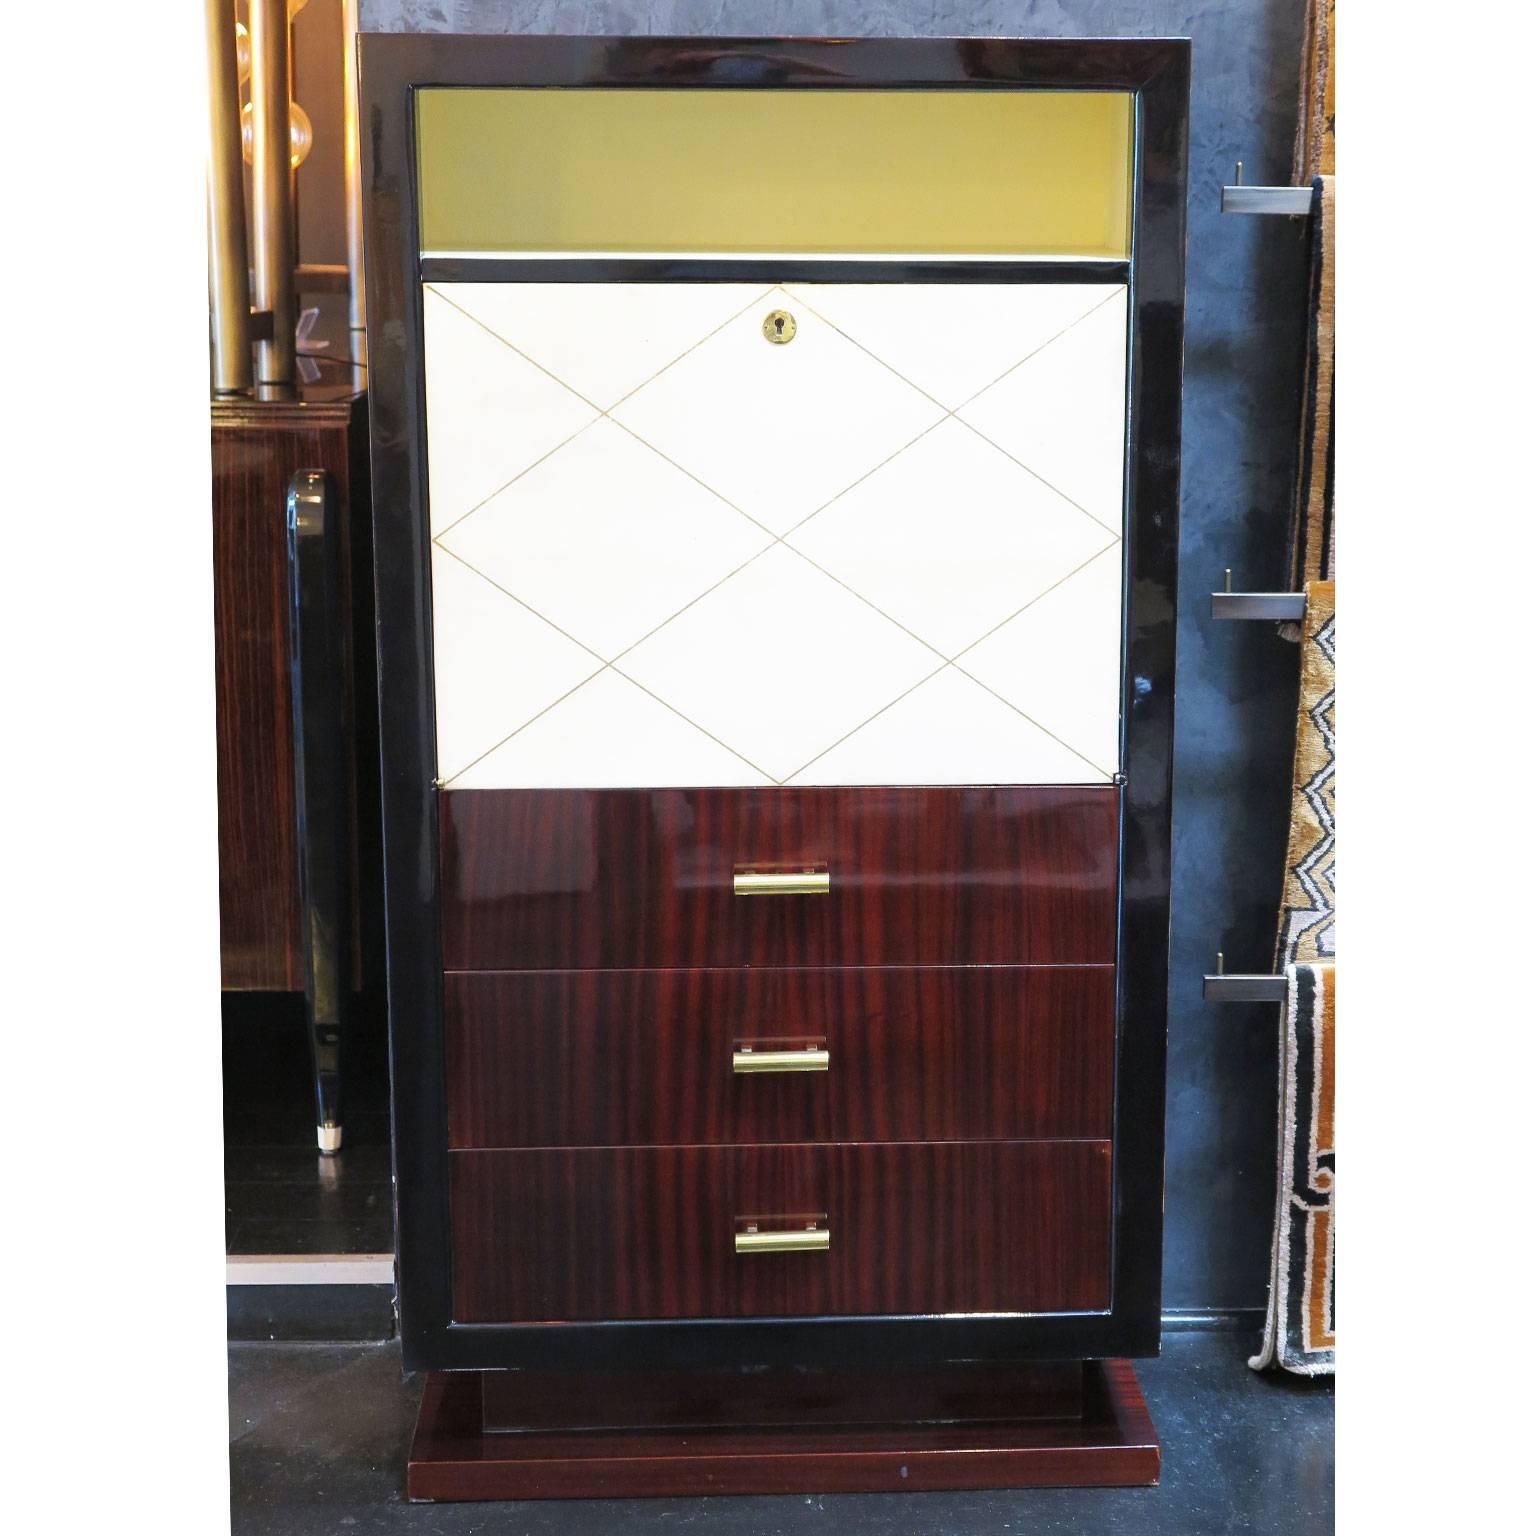 Tall Art Deco secretary in mahogany with dark stained border. Parchment door with gold leaf criss cross design opens to writing table with interior compartments. Three drawers with original brass hardware. Shelf above parchment door for more storage.